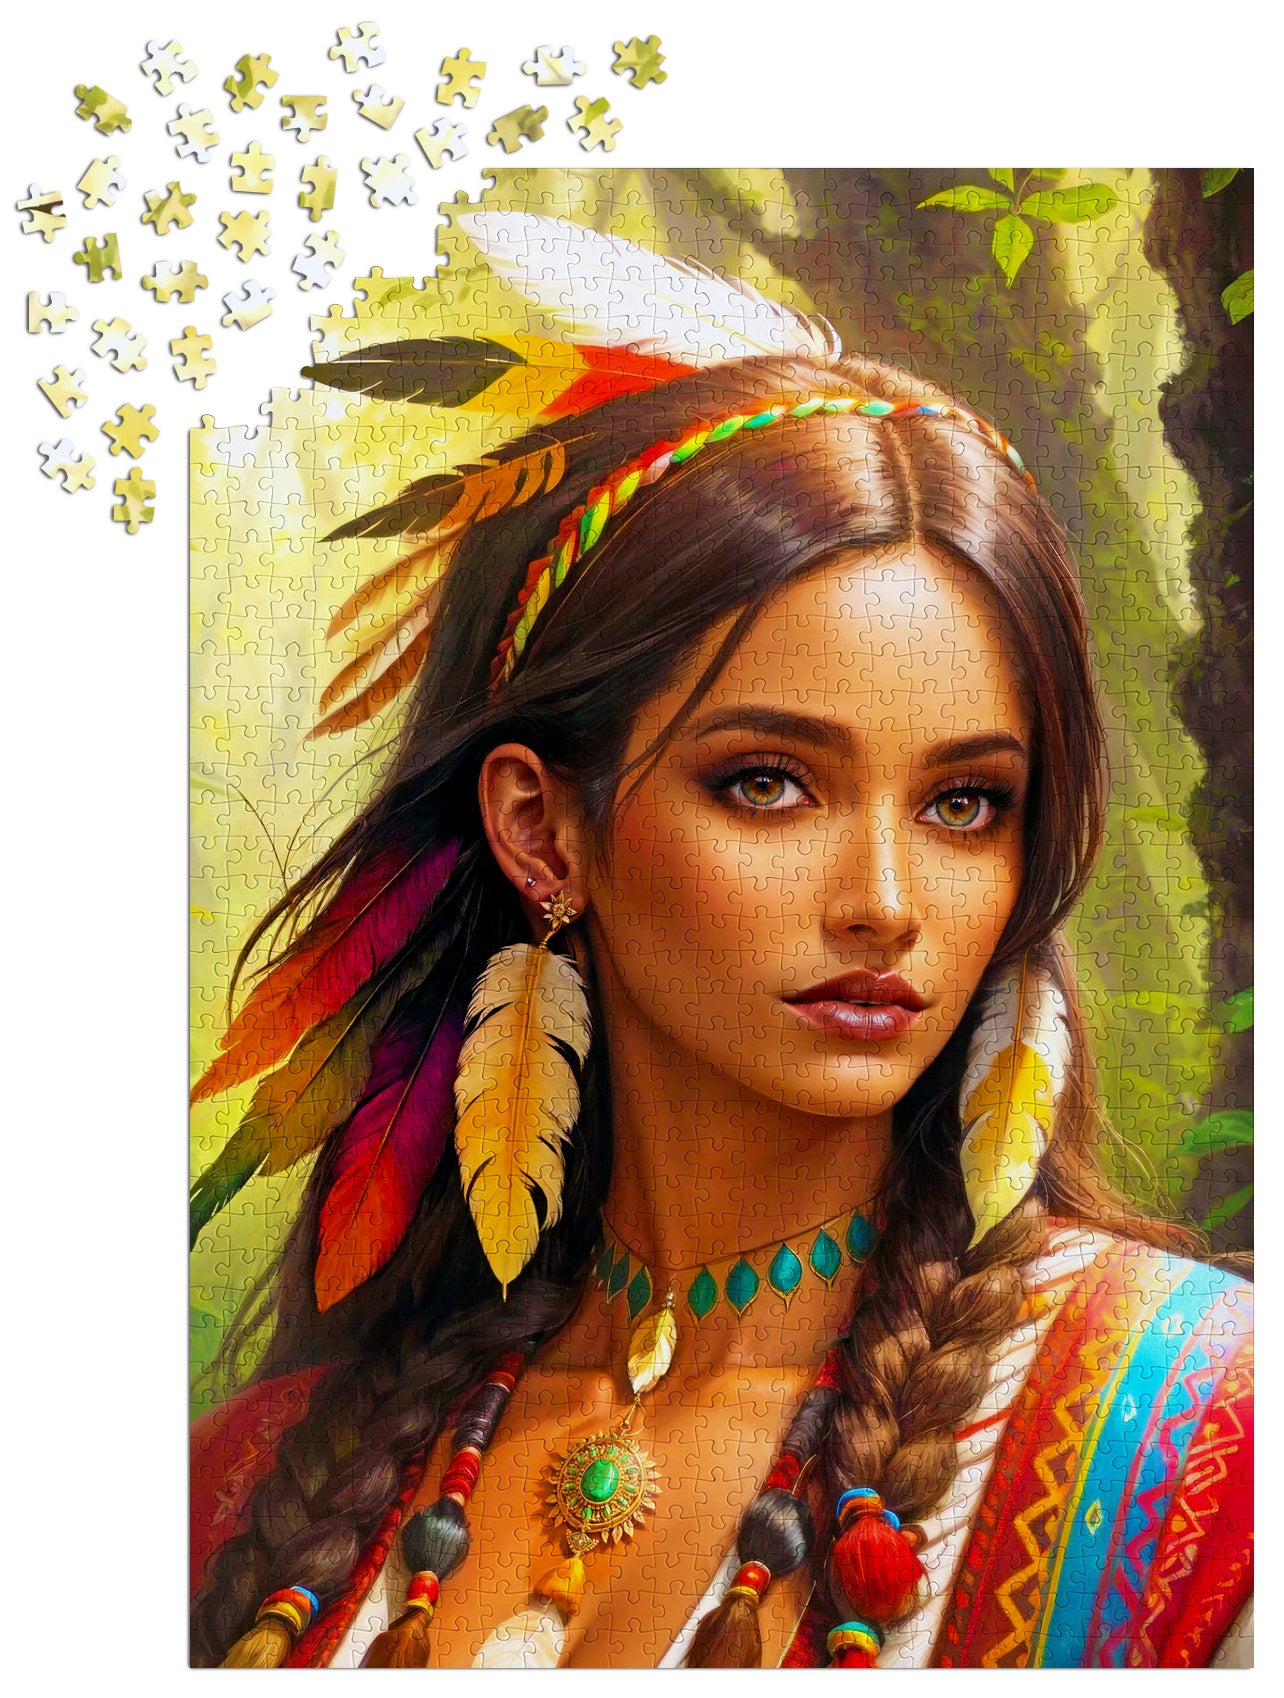 1000 Pieces Jigsaw Puzzle - The Native (2144)